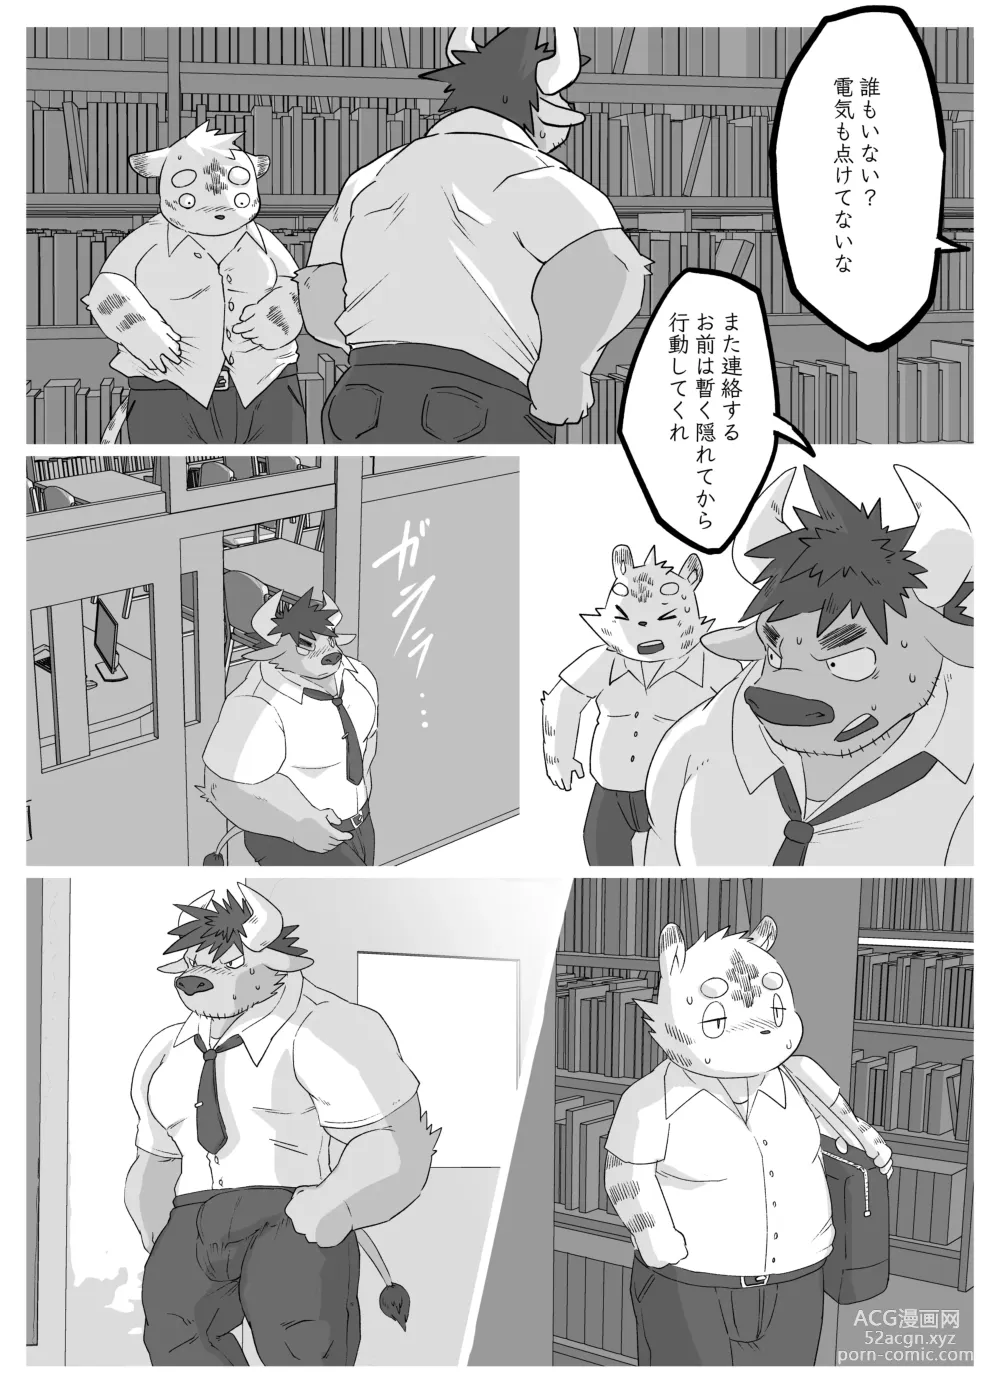 Page 8 of doujinshi Muscular Bull Teacher & Chubby Tiger Student 2